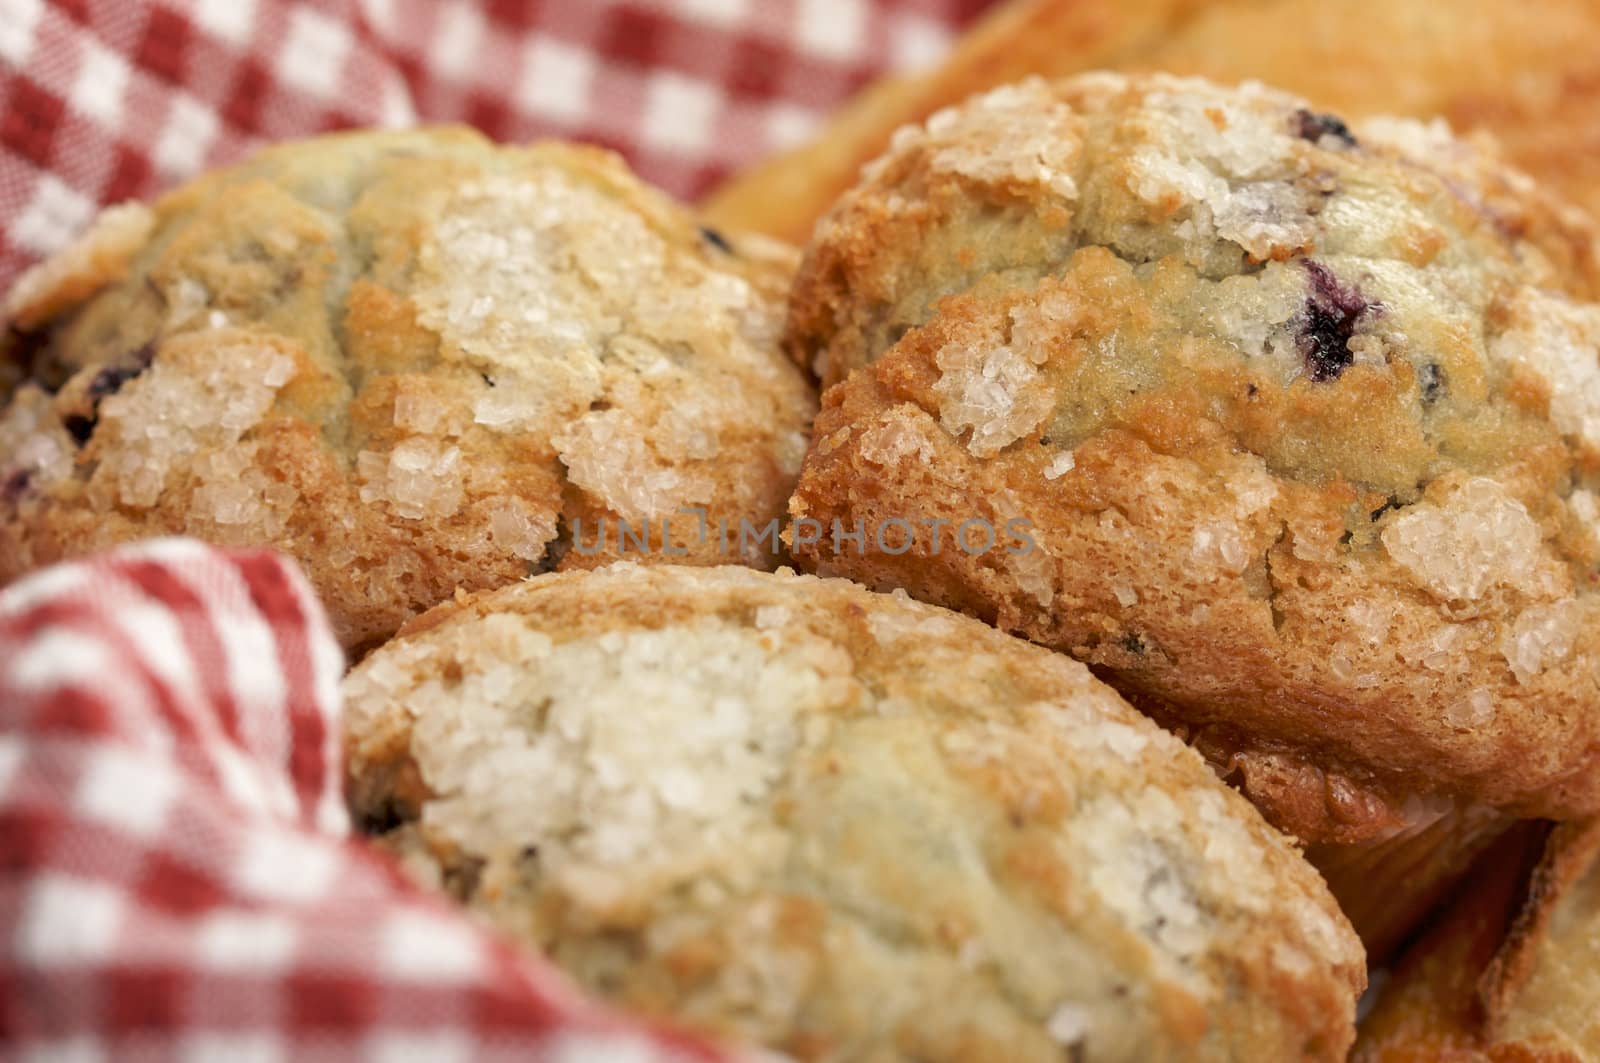 Blueberry Muffins in Basket with Narrow Depth of Field